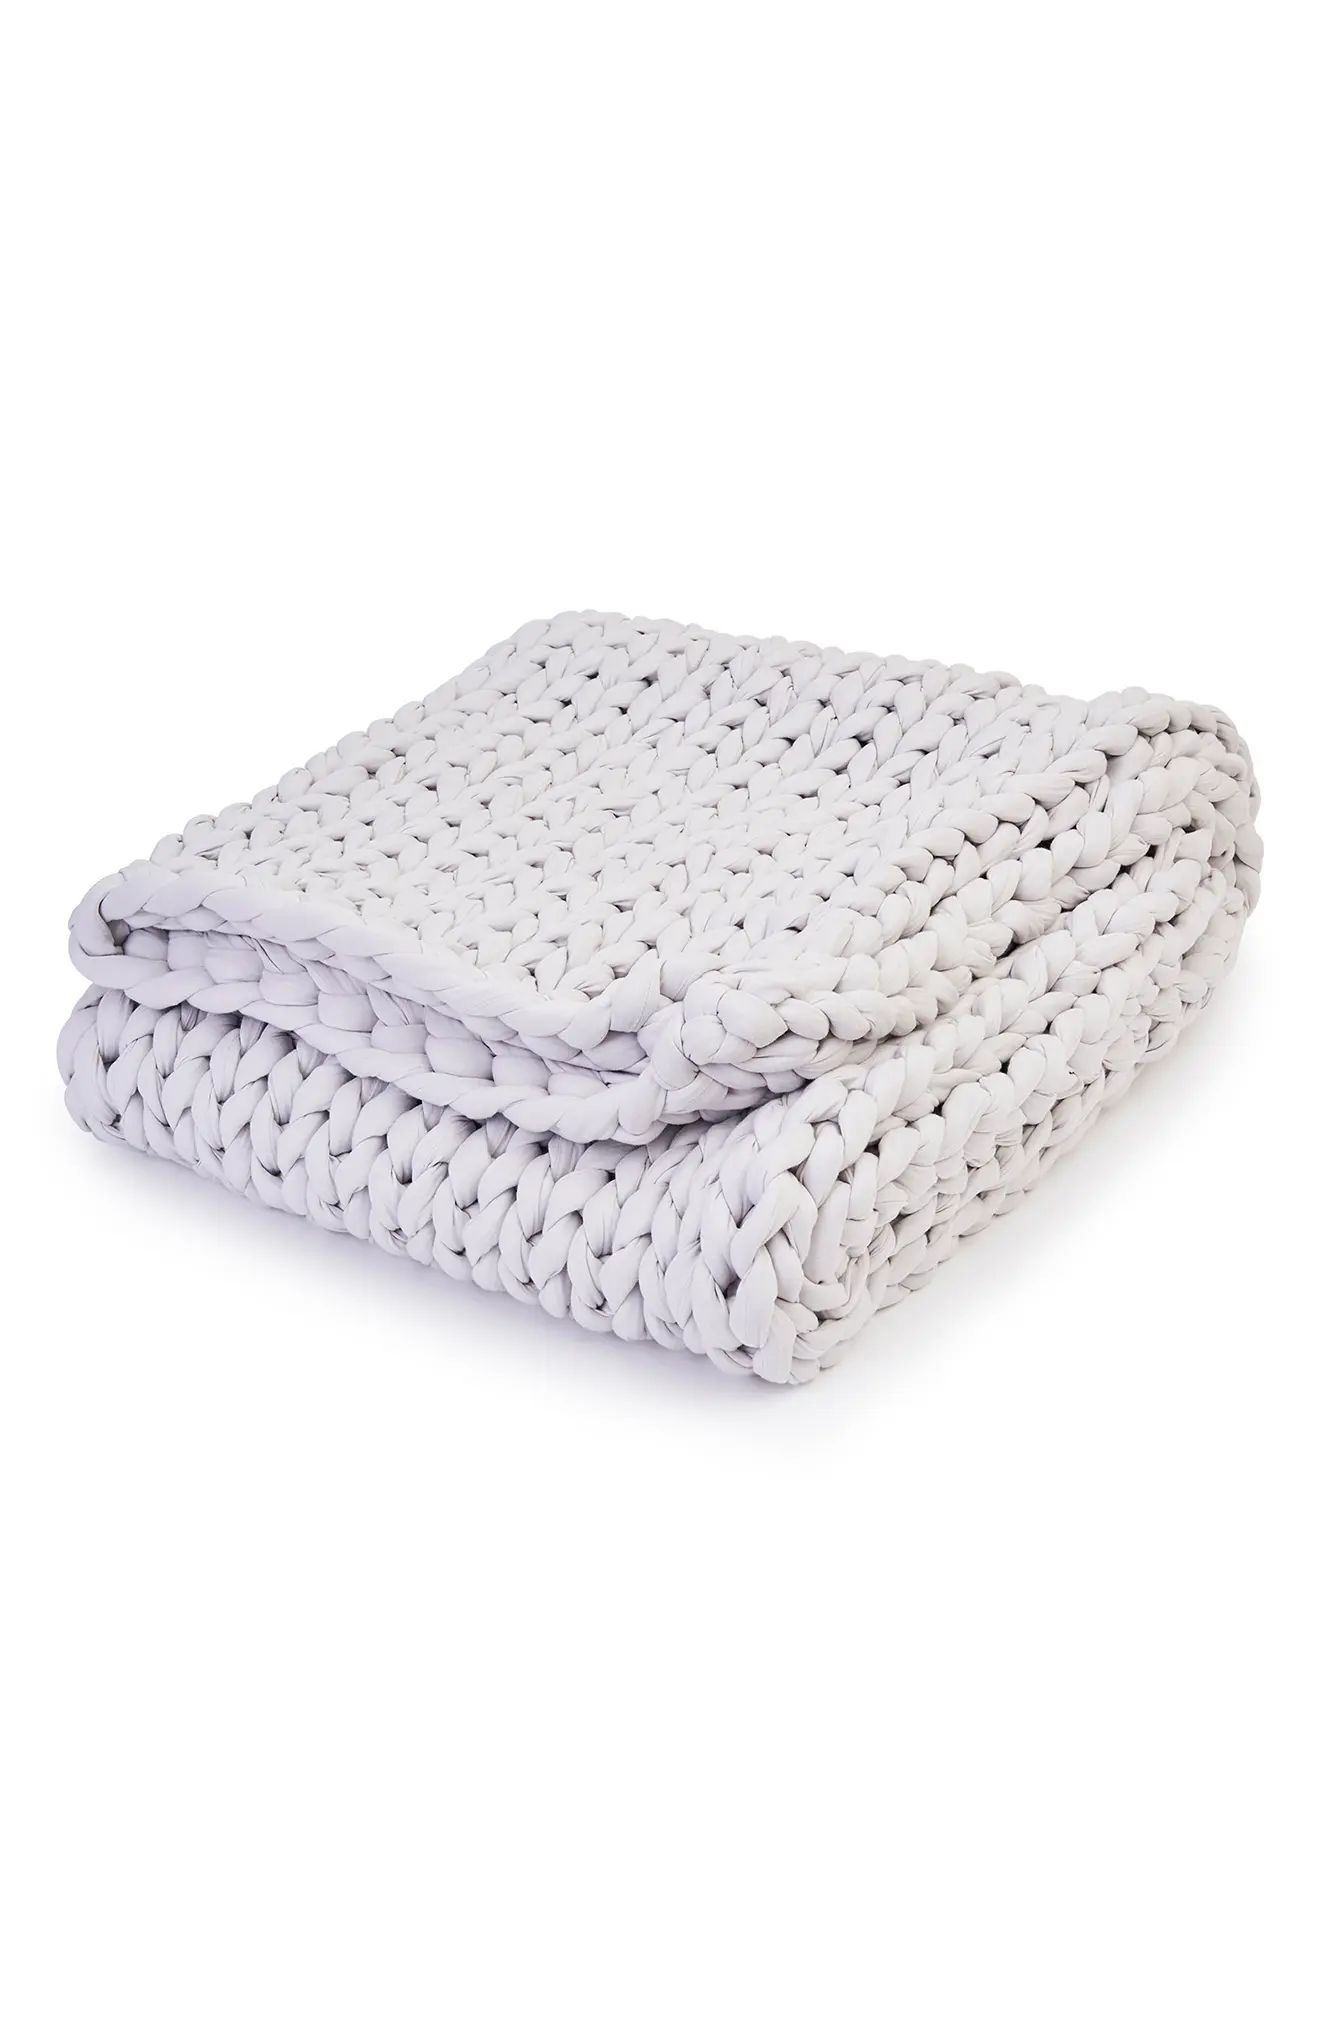 Bearaby Knit Organic Cotton Weighted Blanket, Size 15LB - Grey | Nordstrom